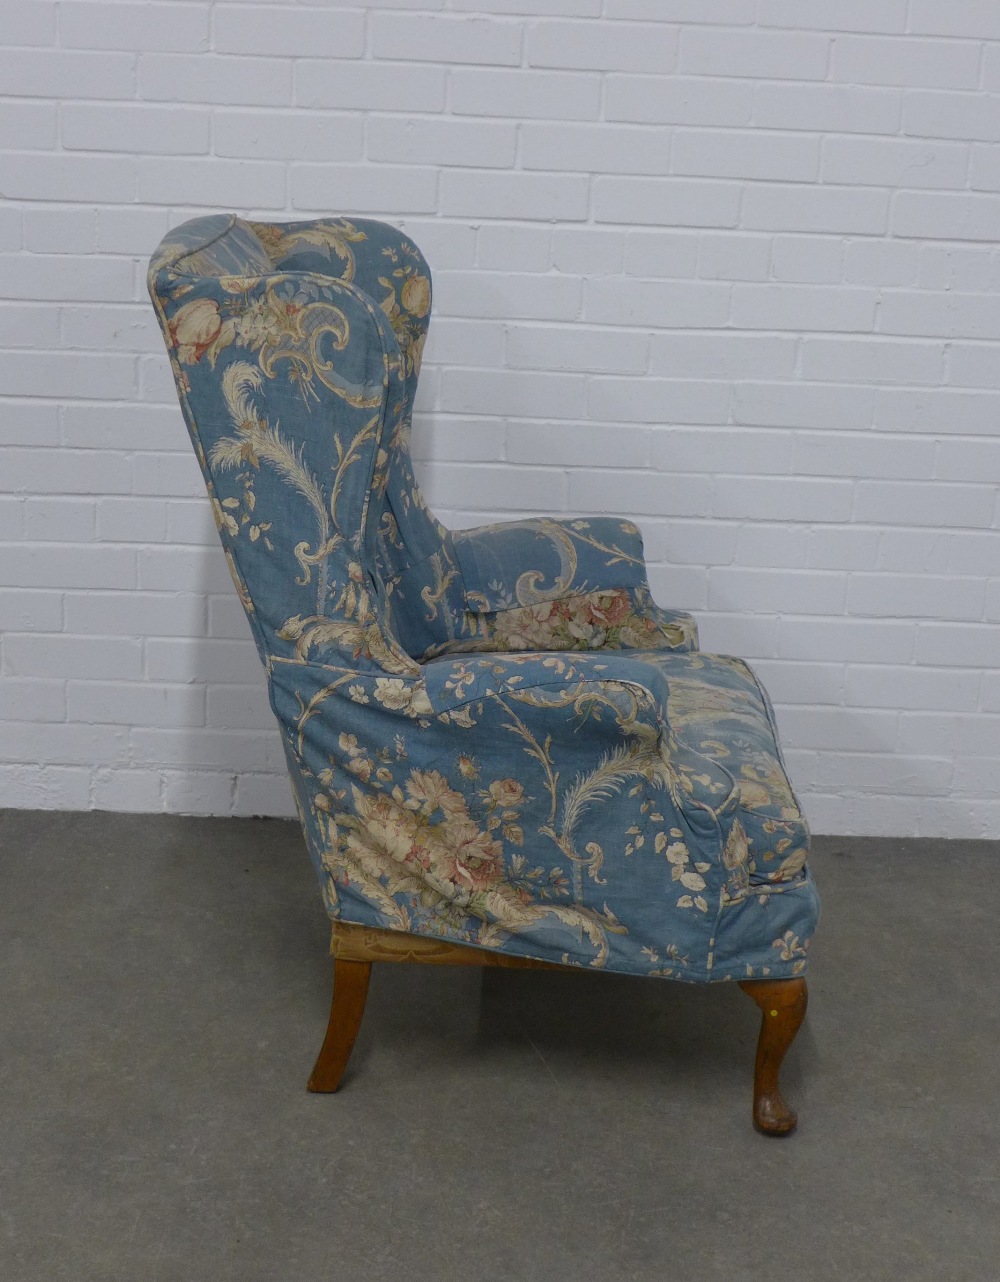 Wingback armchair with country house floral upholstery / covers, 78 x 102 x 52cm. - Image 3 of 3